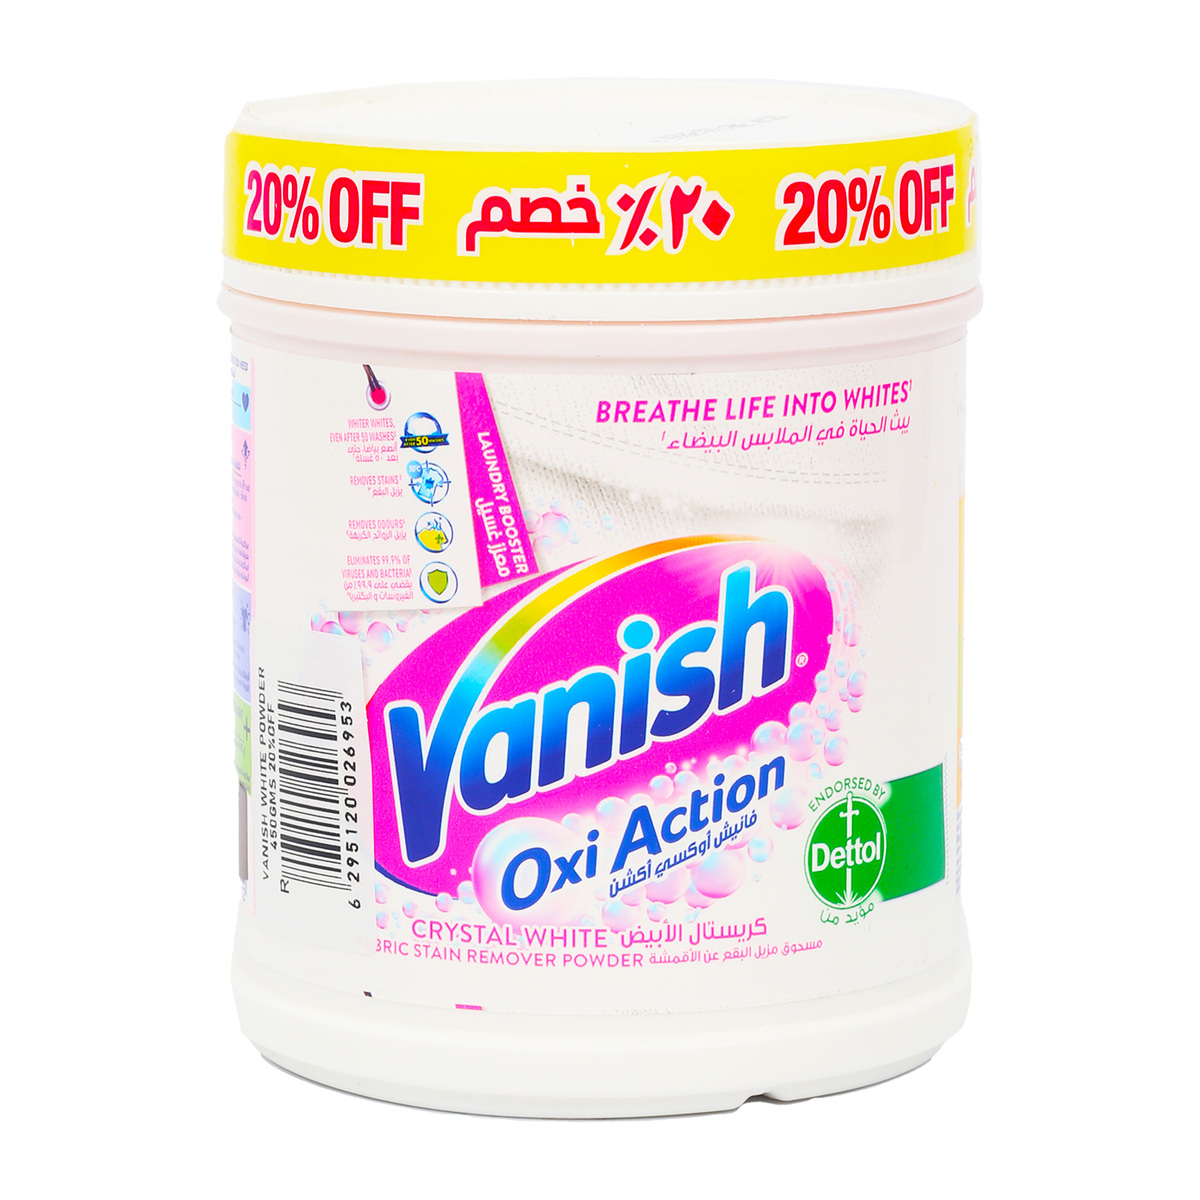 Vanish Oxi Action Crystal White Fabric Stain Remover Powder Value Pack 450 g